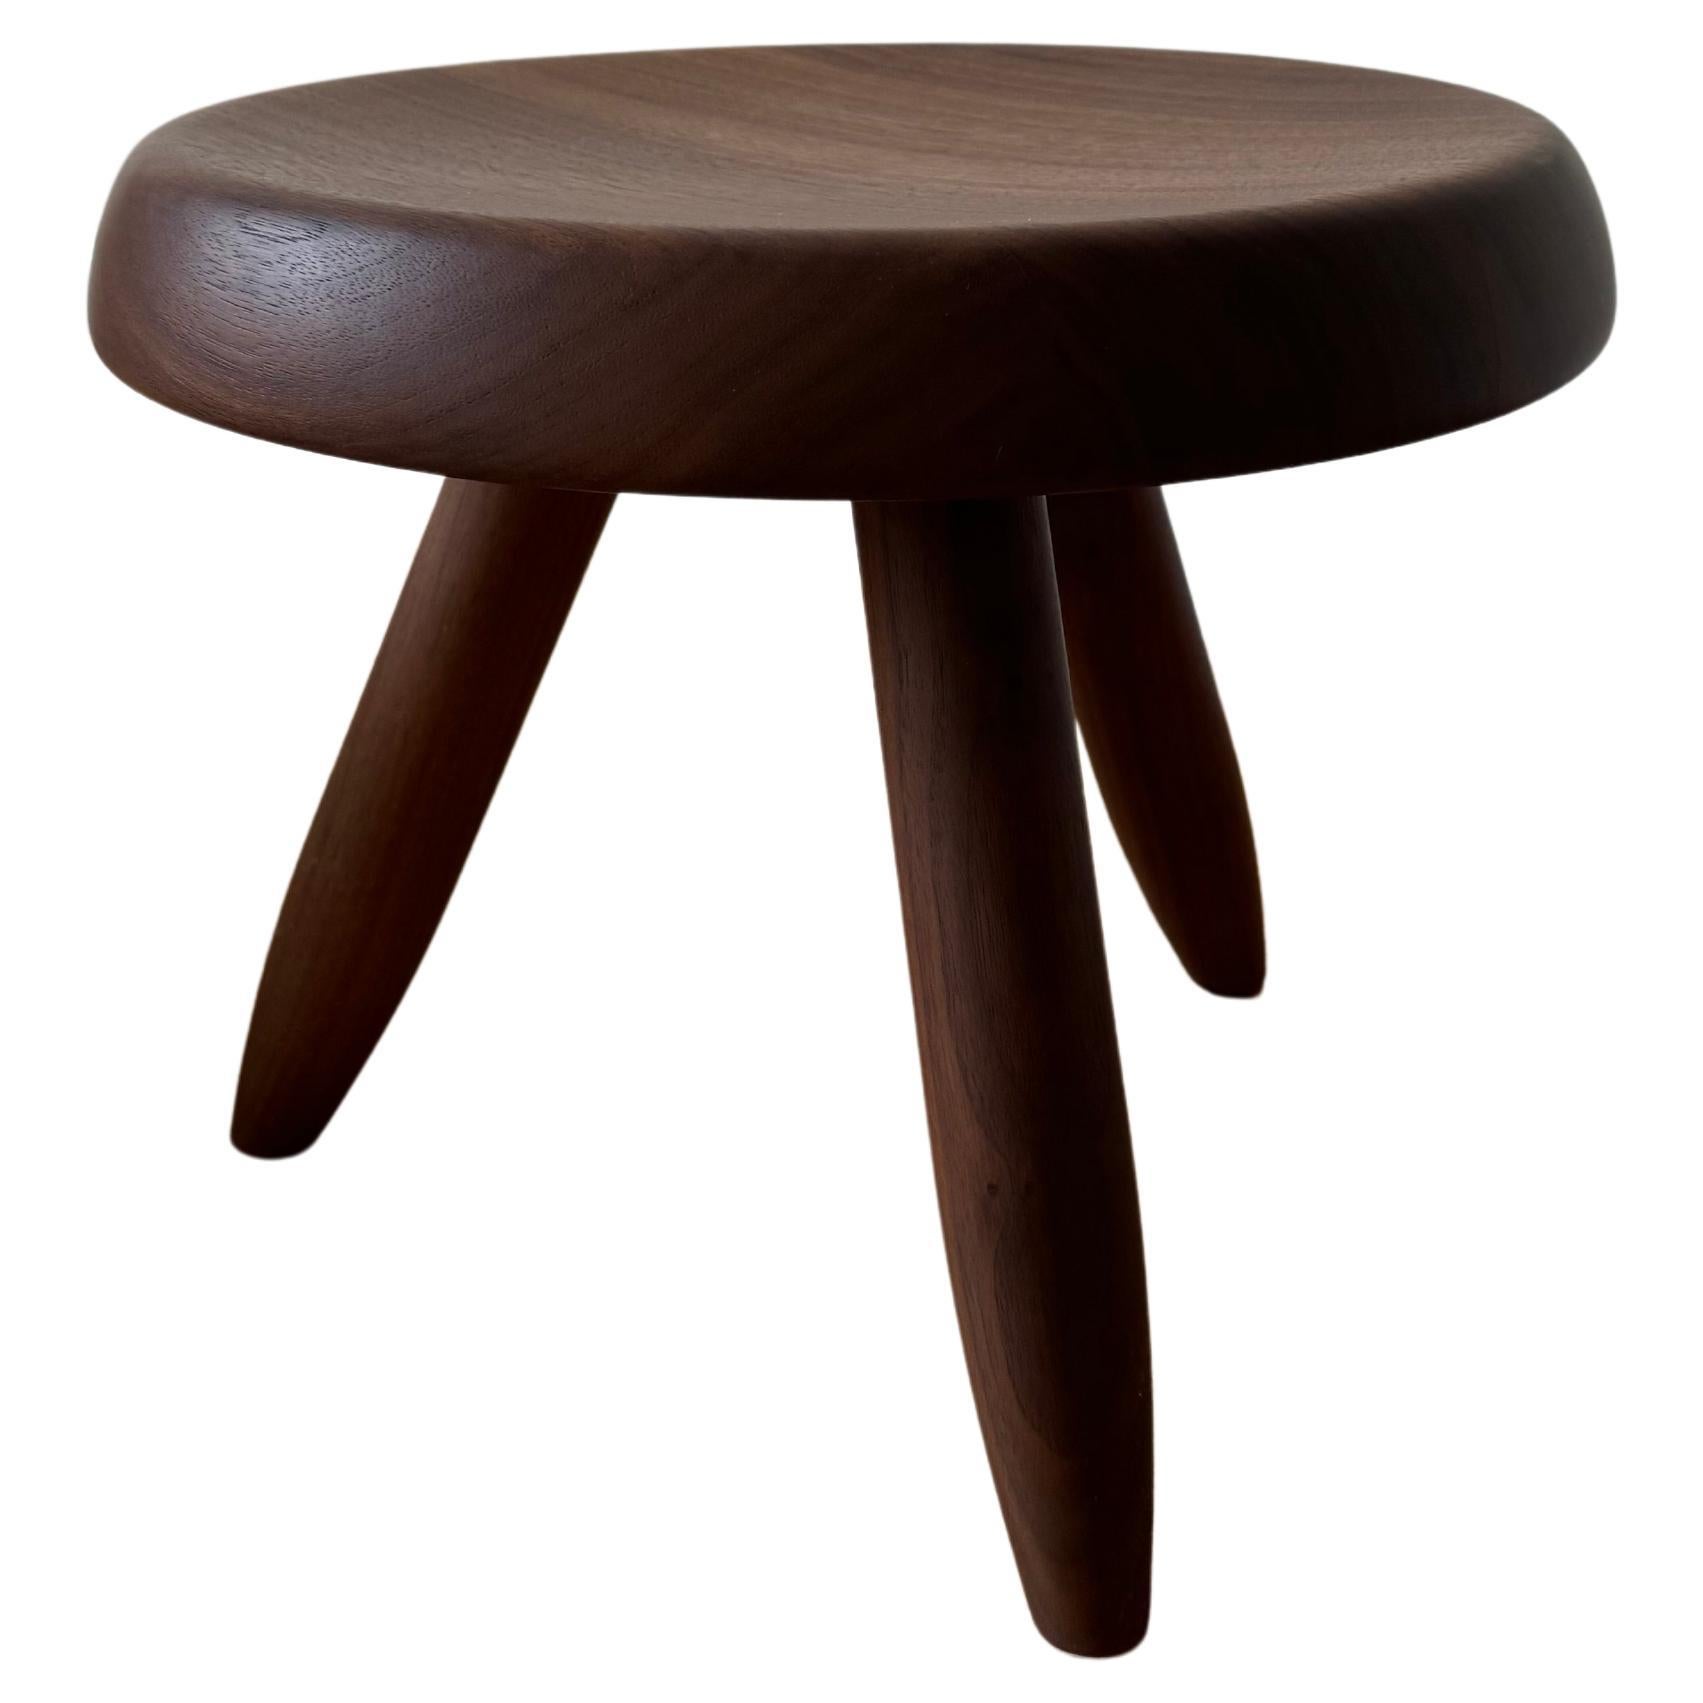 Tabouret Berger (Berger Stool) by Charlotte Perriand for Cassina